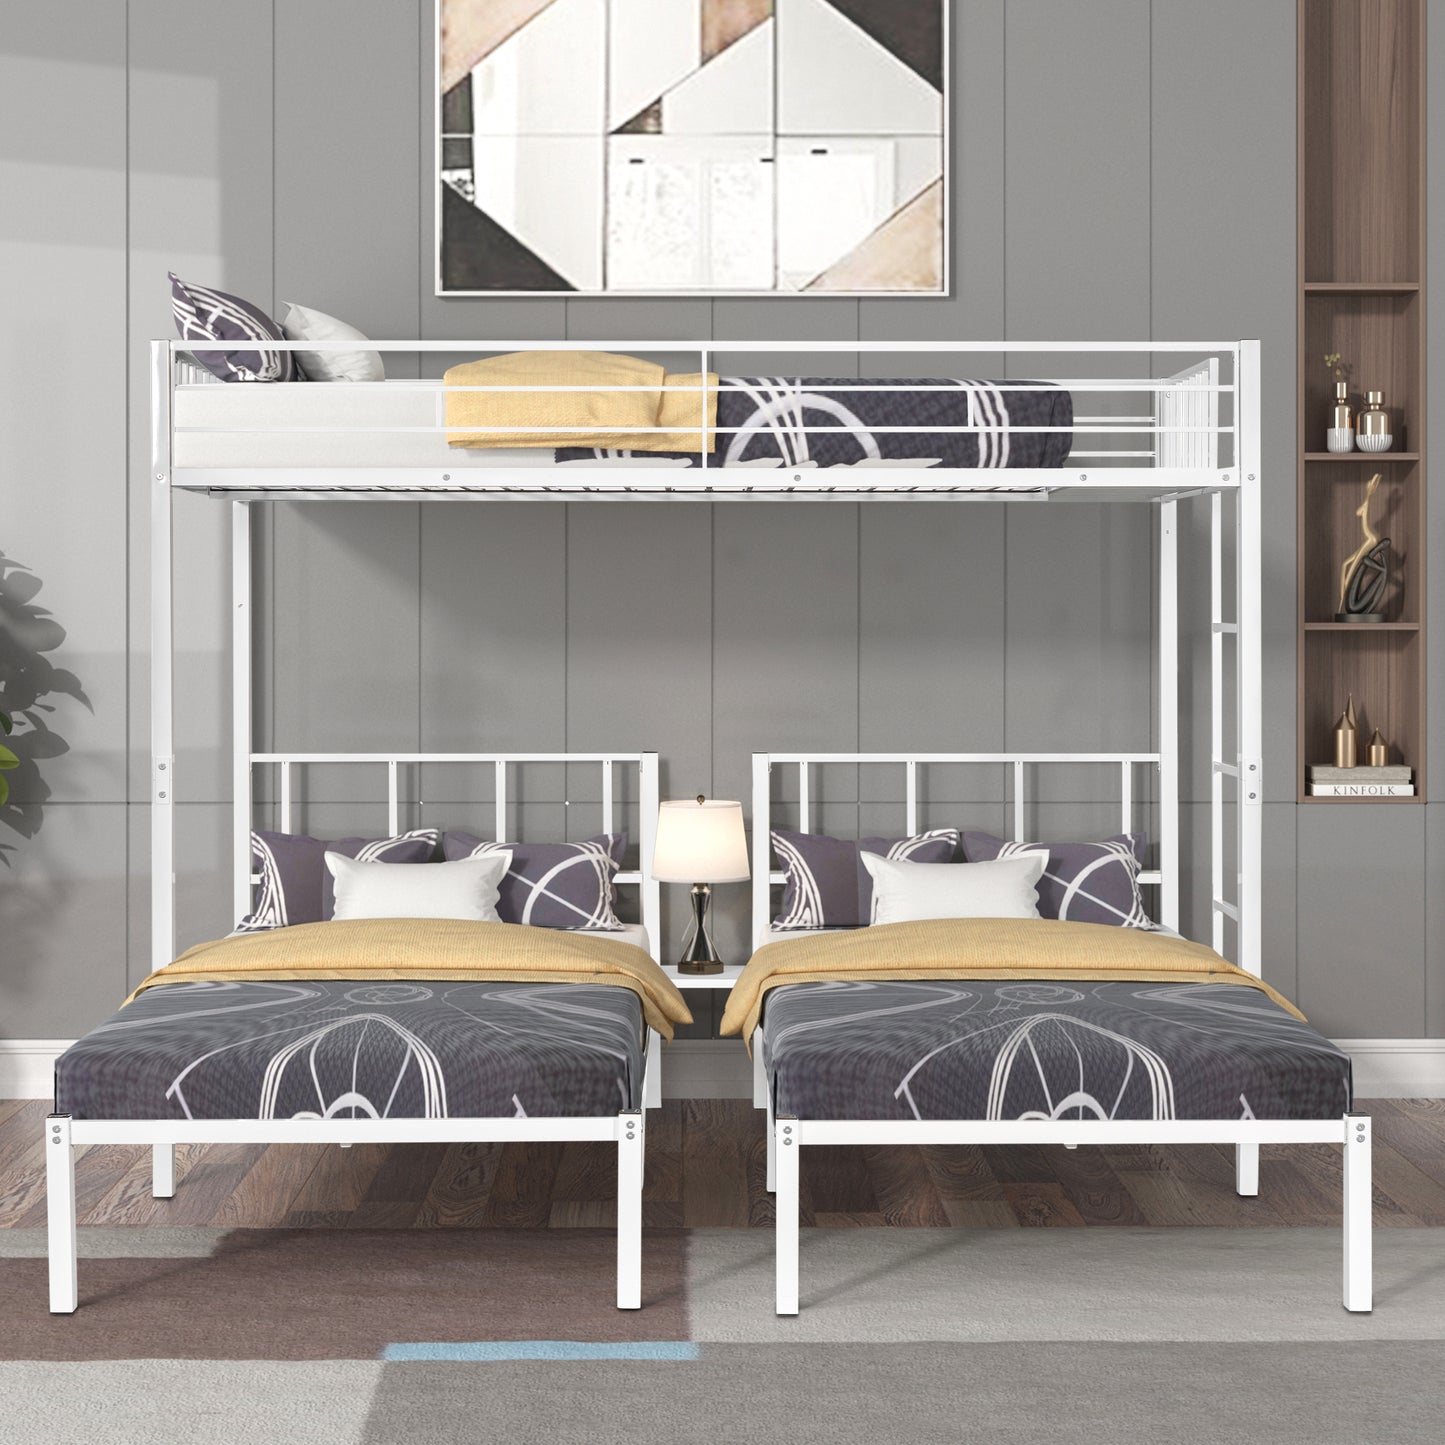 HSUNNS Metal Triple Bed Twin Over Twin&Twin for Kids, Modern Triple Bunk Bed with Guardrails and Ladder, Separable into 3 Platform Bed with Headboard, White Twin Bed Frame for Boys Girls